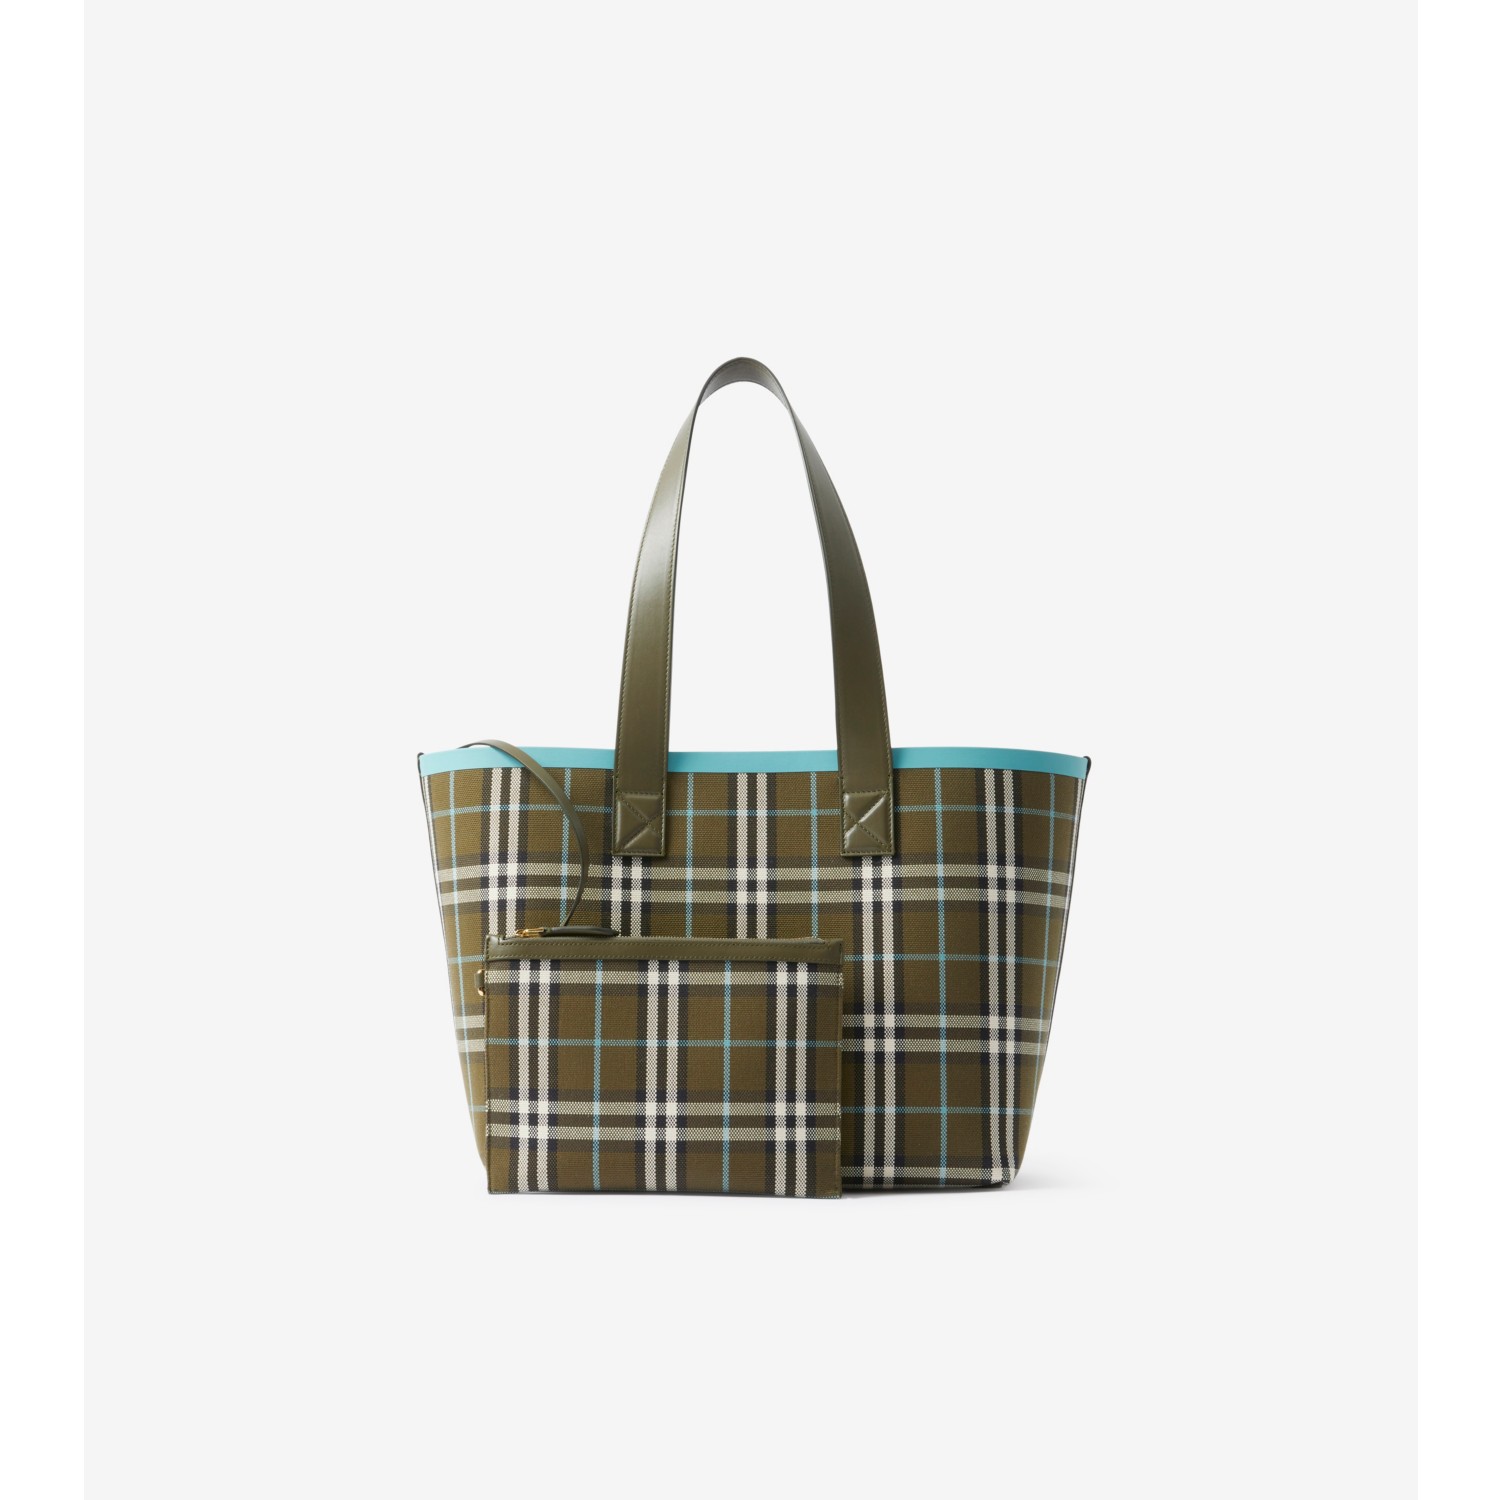 Medium London Tote Bag in Olive Green - Women | Burberry® Official